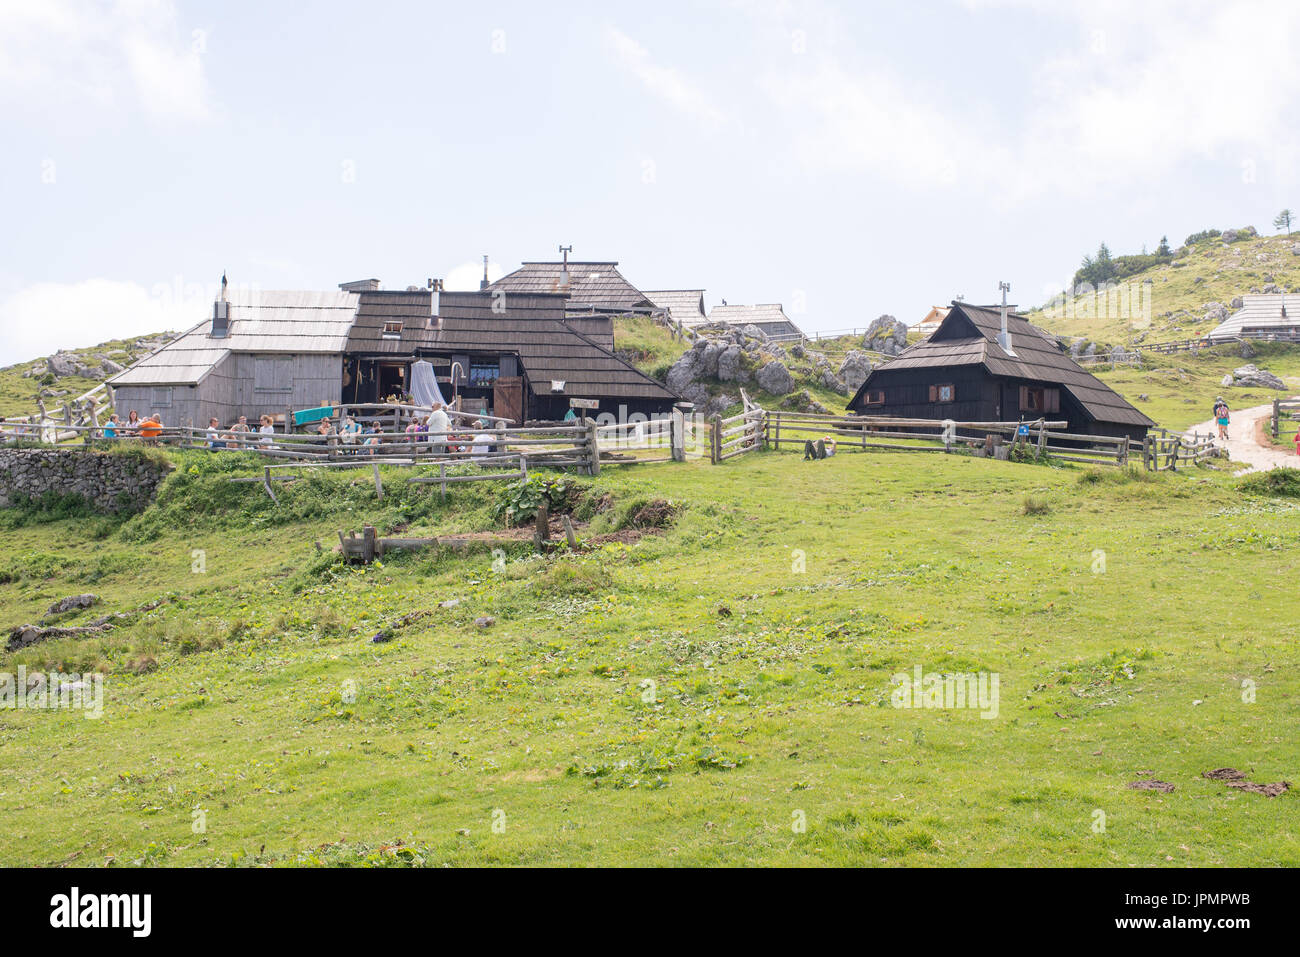 Velika planina plateau, Slovenia, Mountain village in Alps, wooden houses in traditional style, popular hiking destination Stock Photo